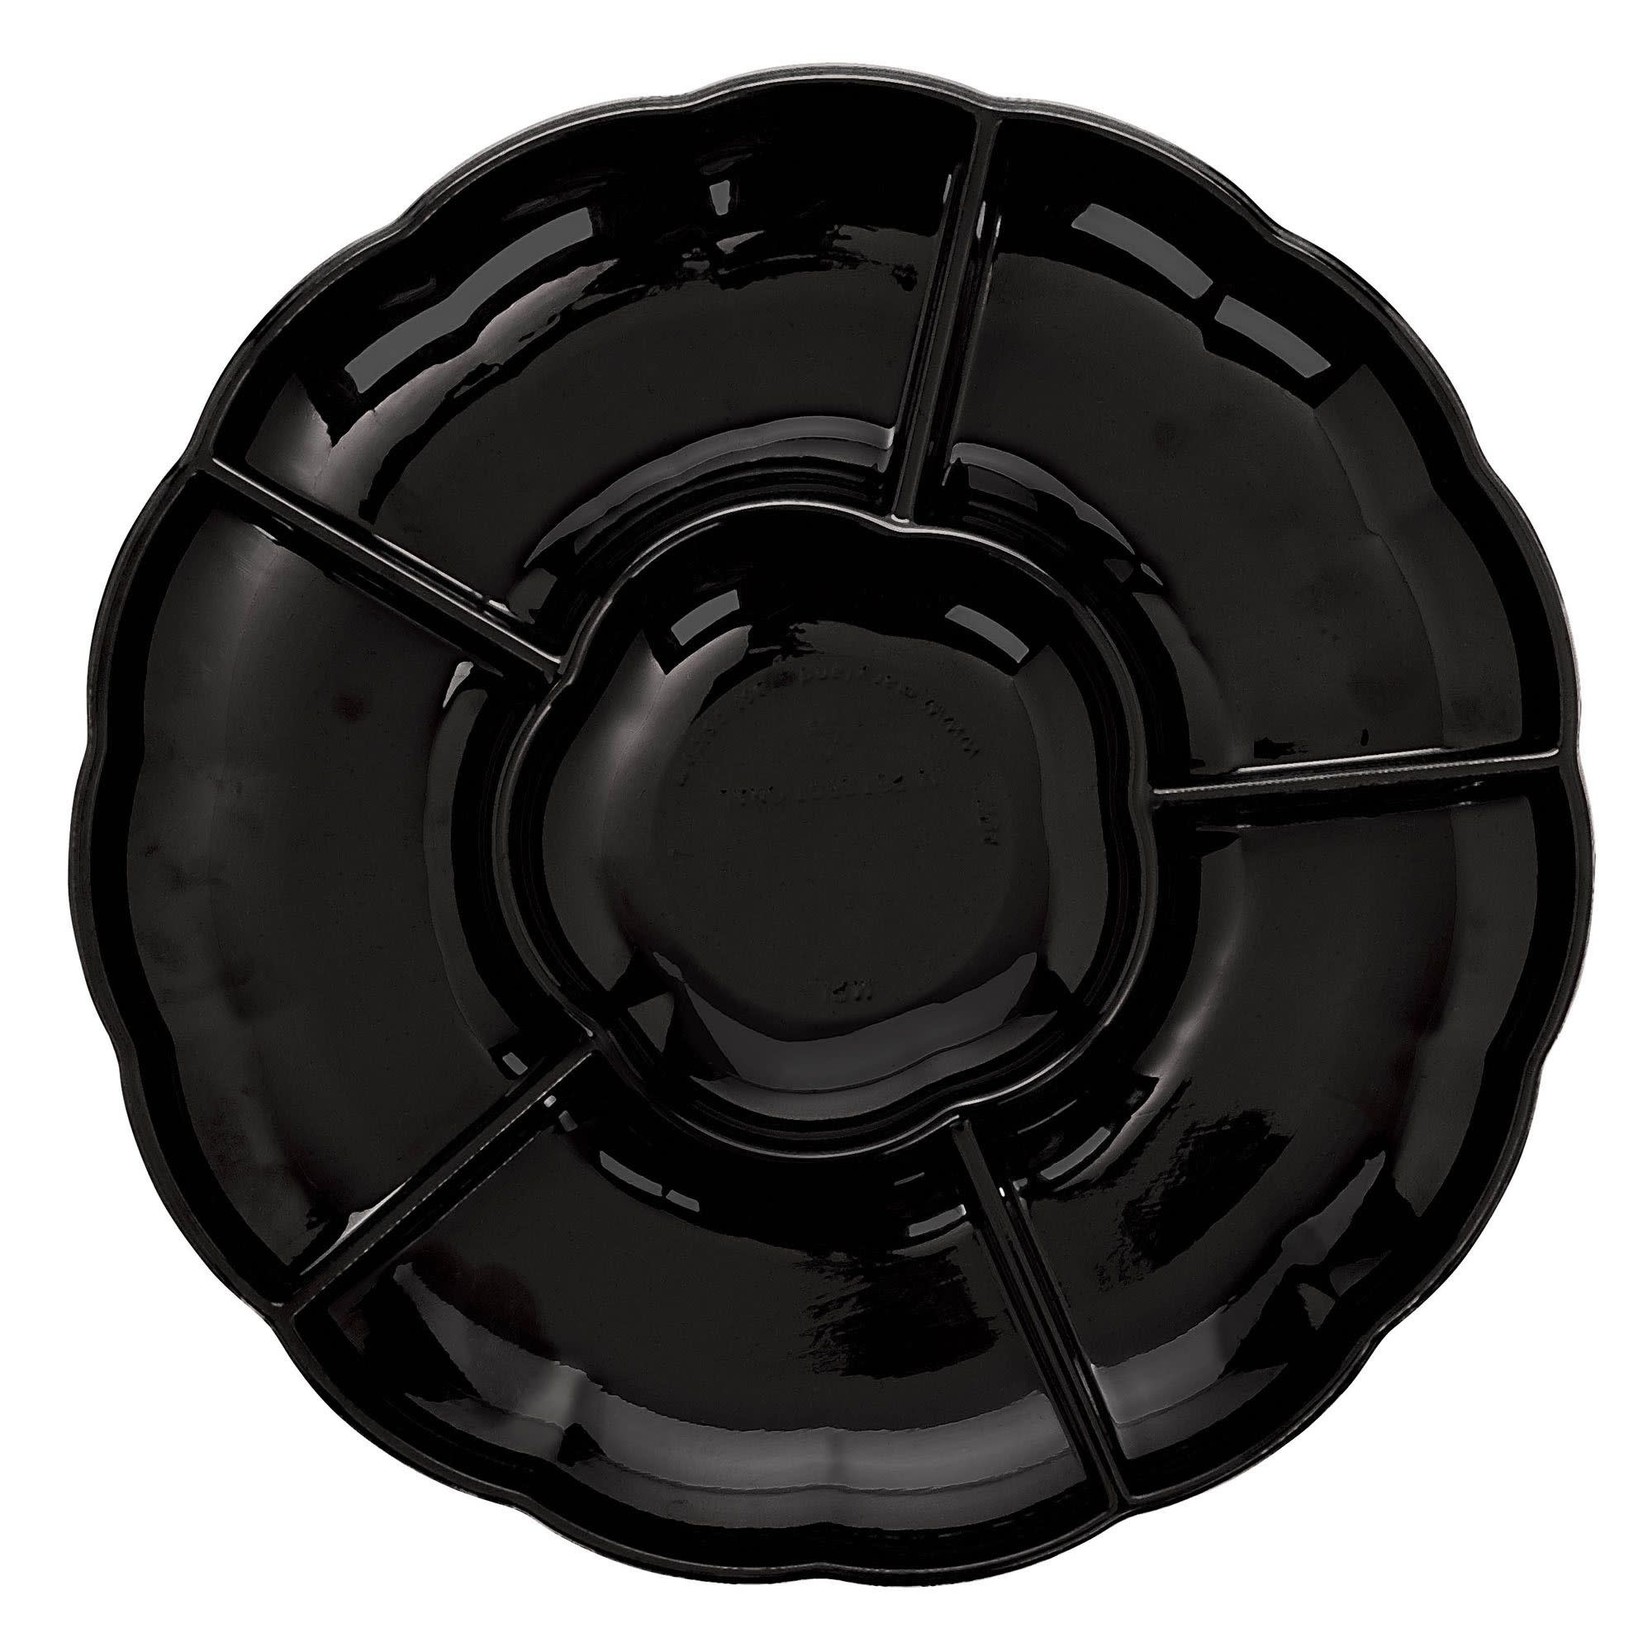 16" Compartment Chip & Dip Tray - Black